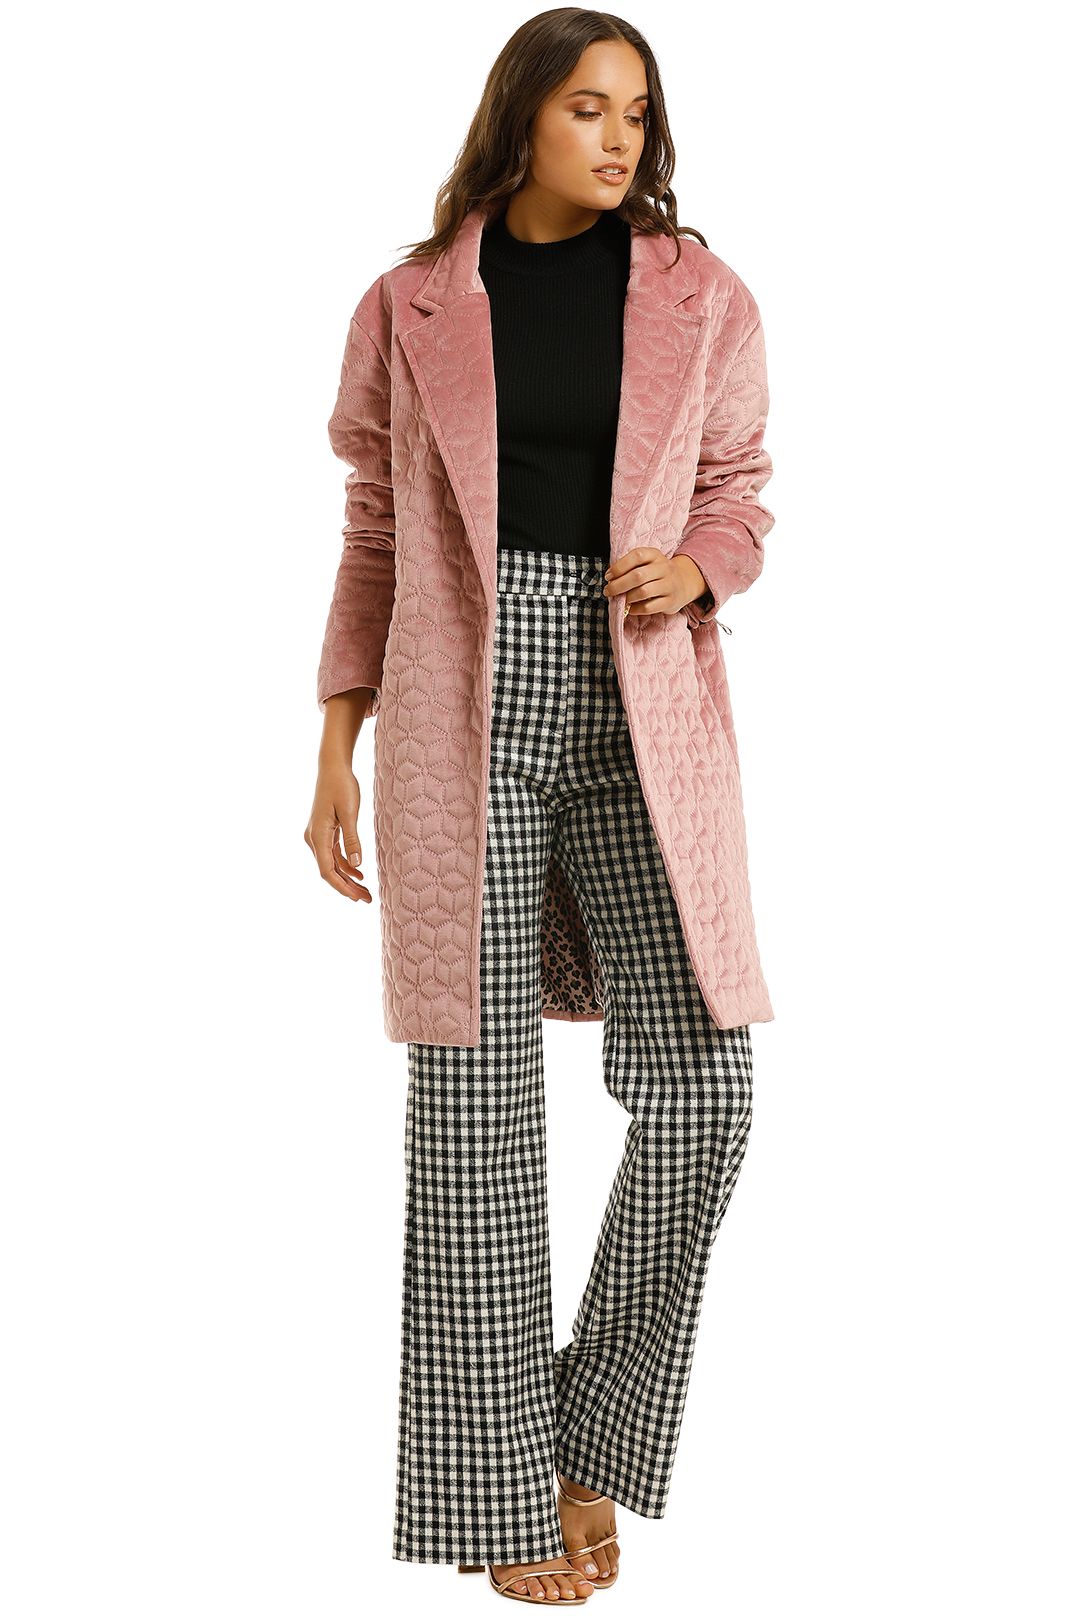 Curate-by-Trelise-Cooper-Little-Quality-Coat-Pink-Side